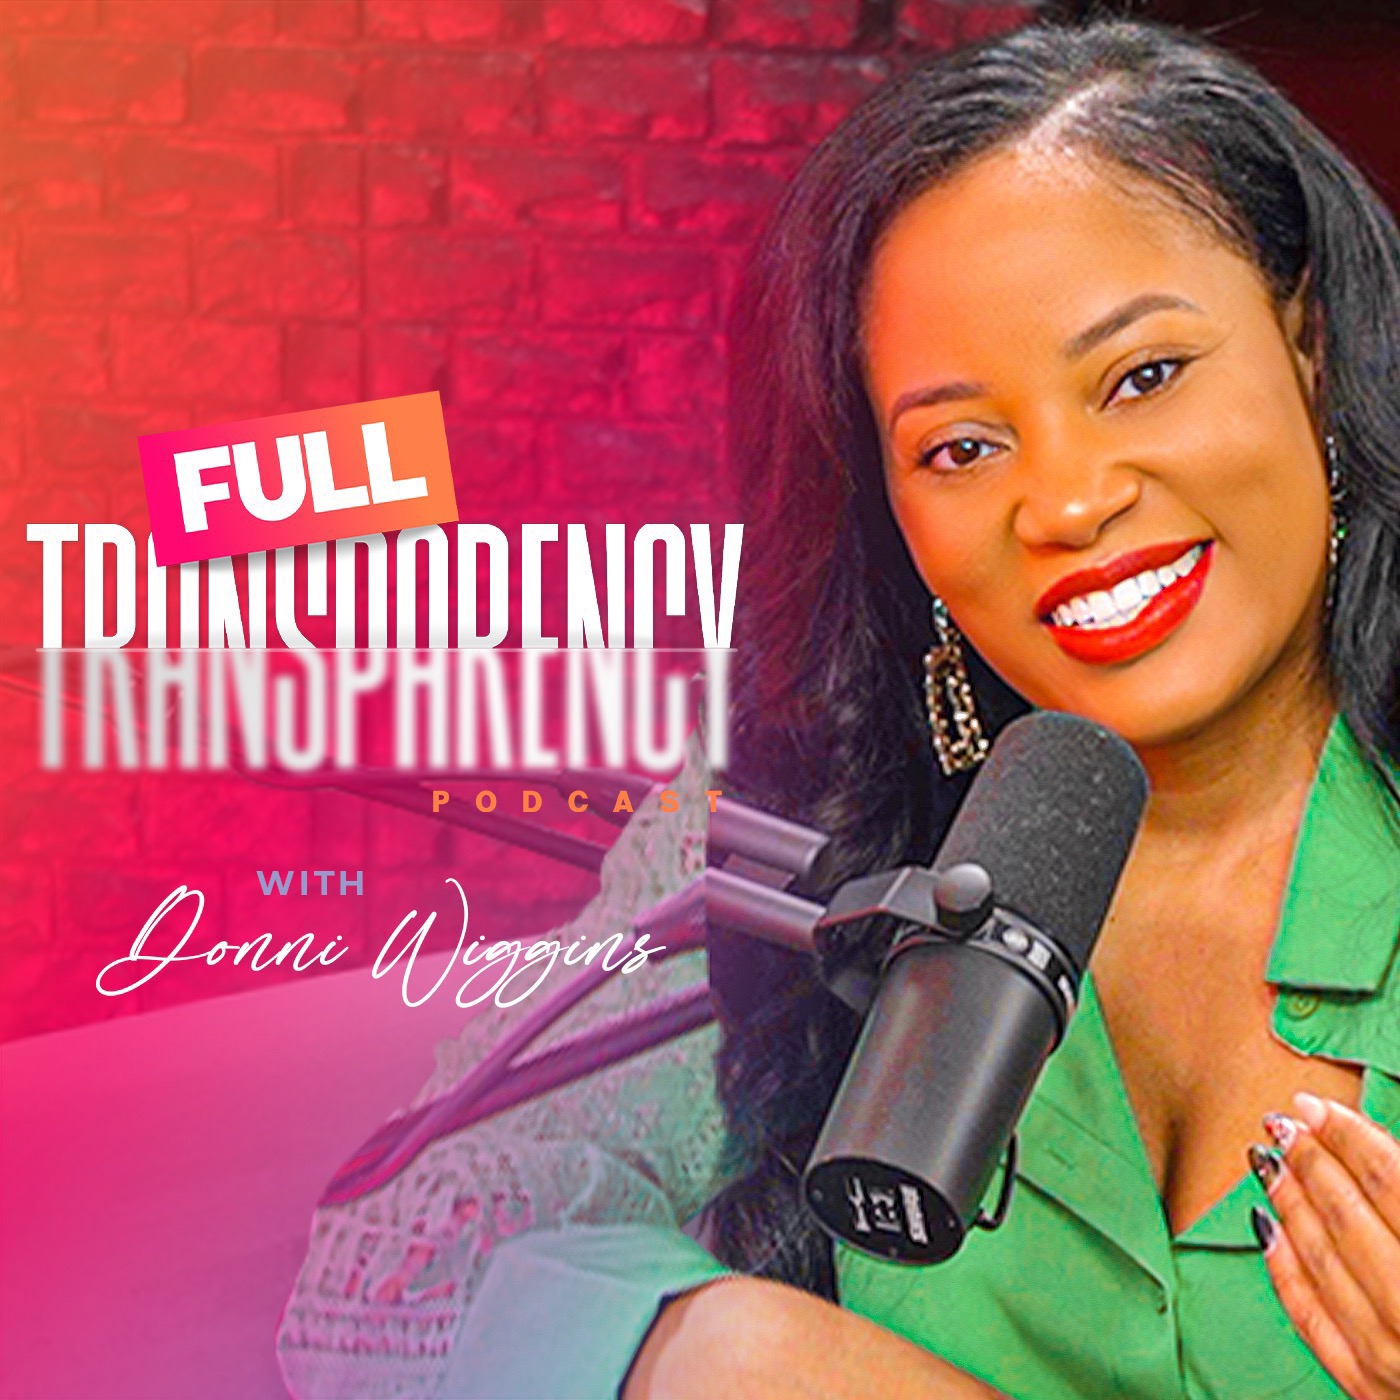 Losses, Breakups & Breakthroughs with Donni WIggins